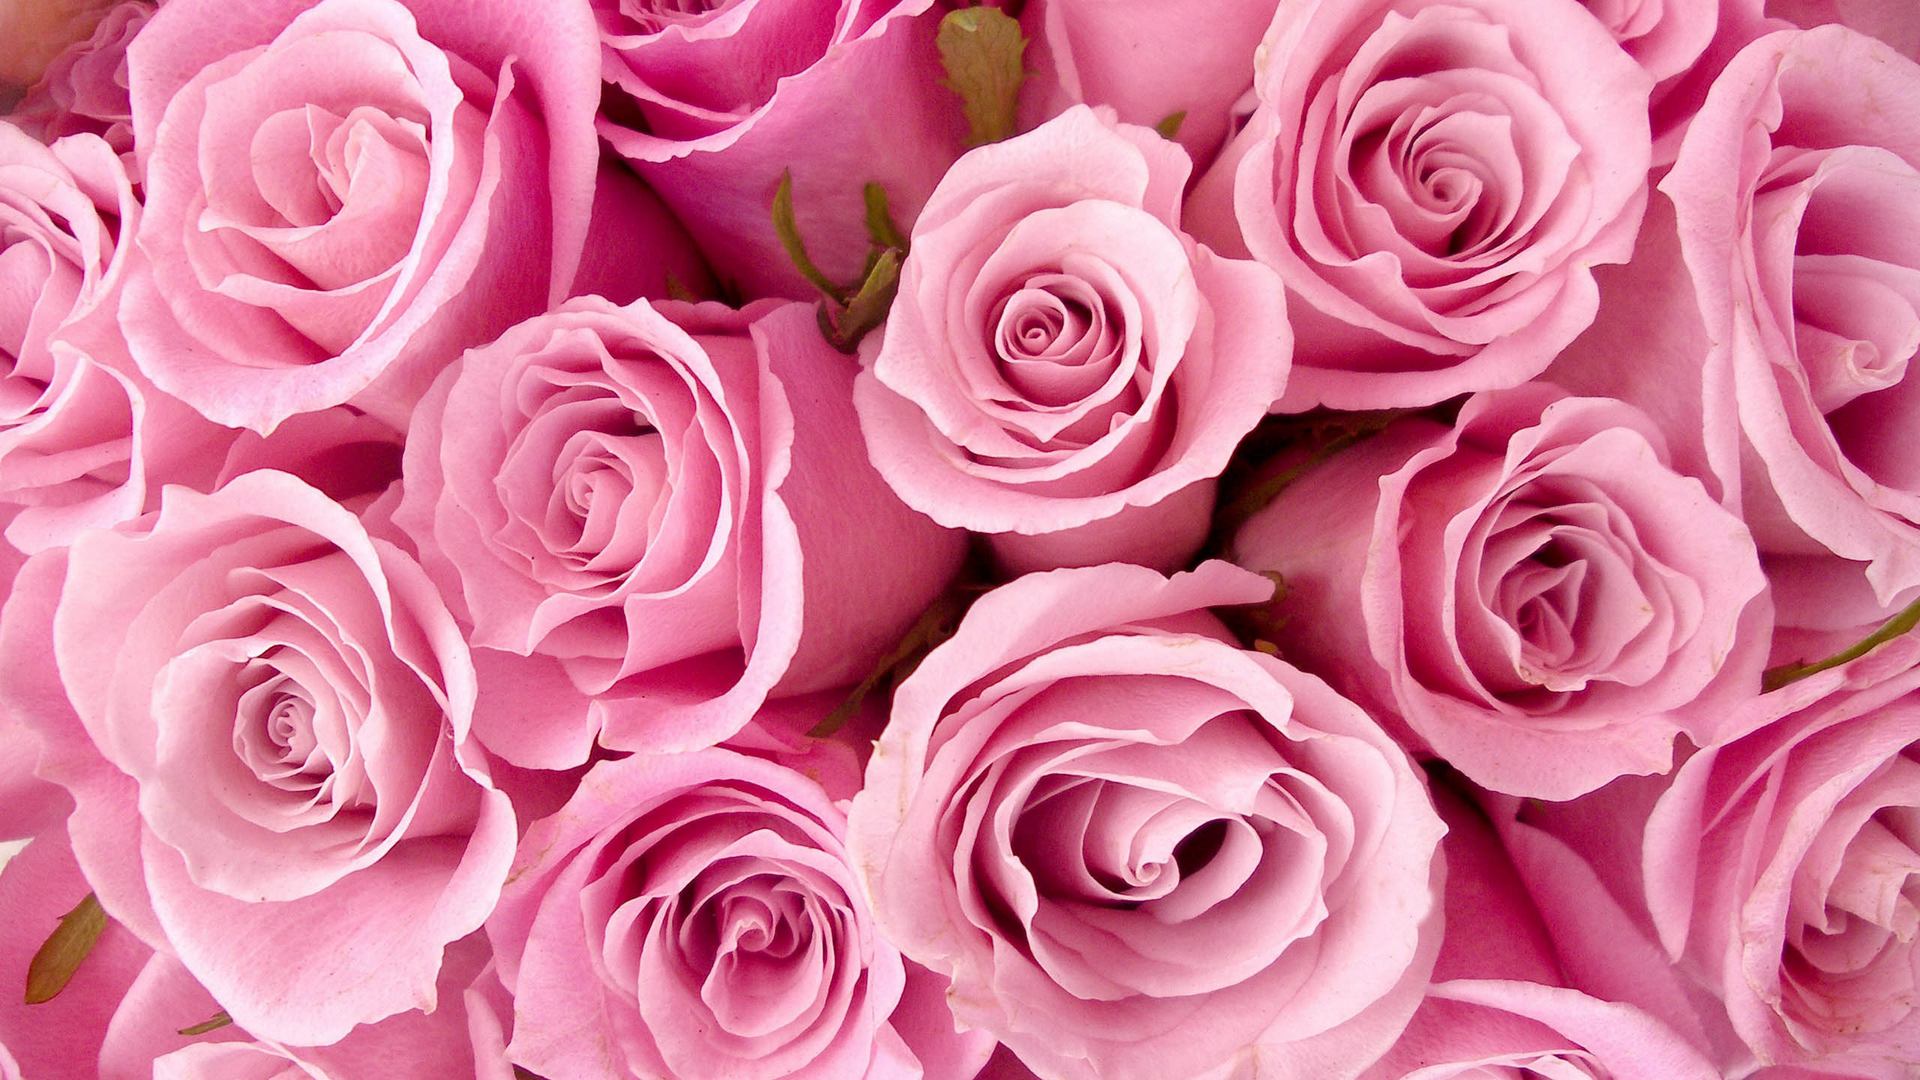 Flowers Pink Roses wallpapers (Desktop, Phone, Tablet) - Awesome ...